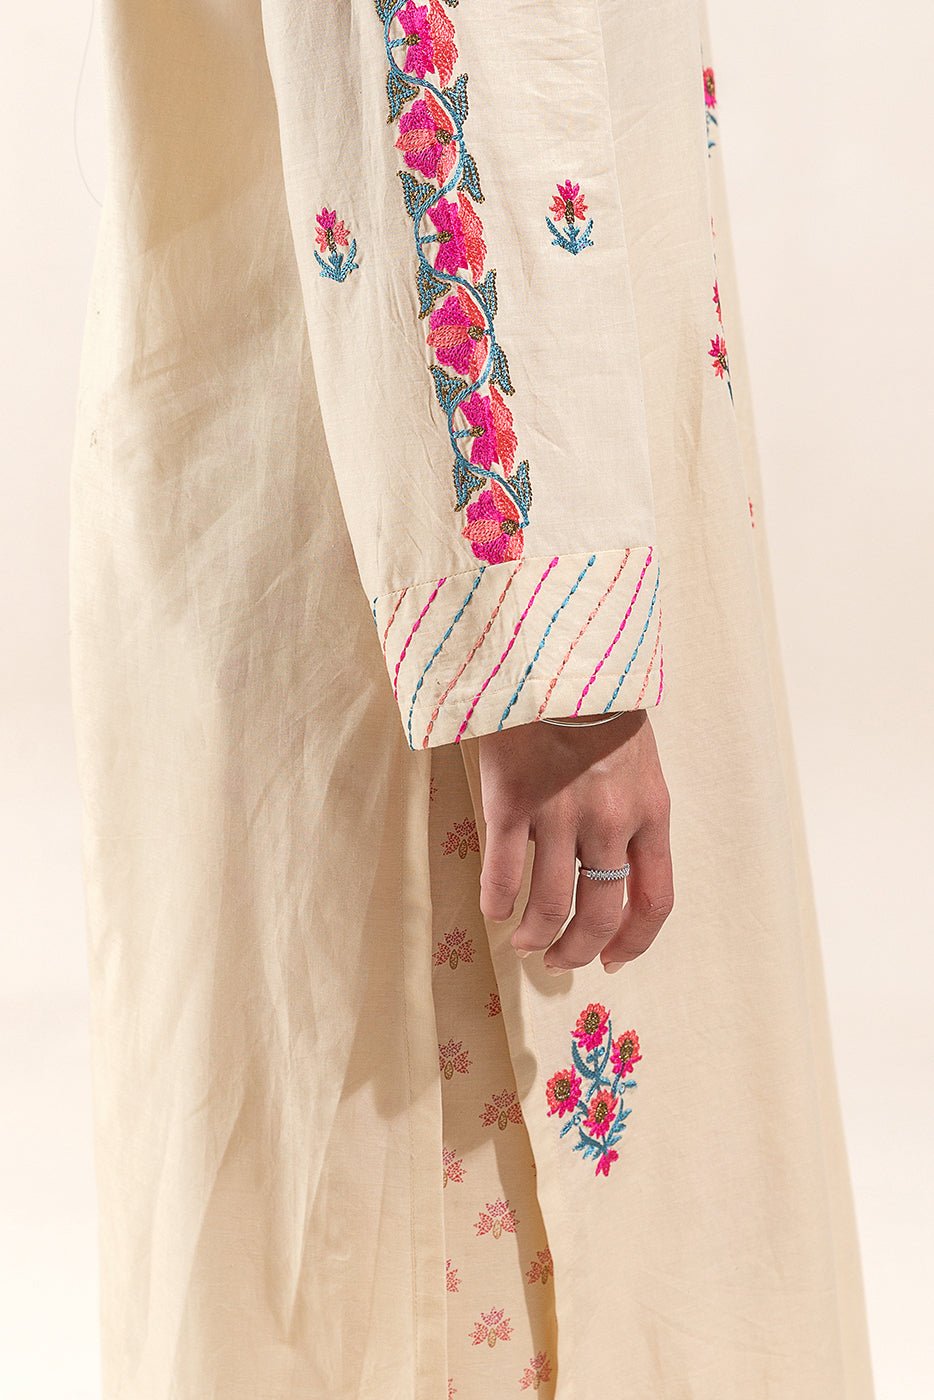 2 PIECE EMBROIDERED LAWN SUIT-FRENCH VANILLA (UNSTITCHED)